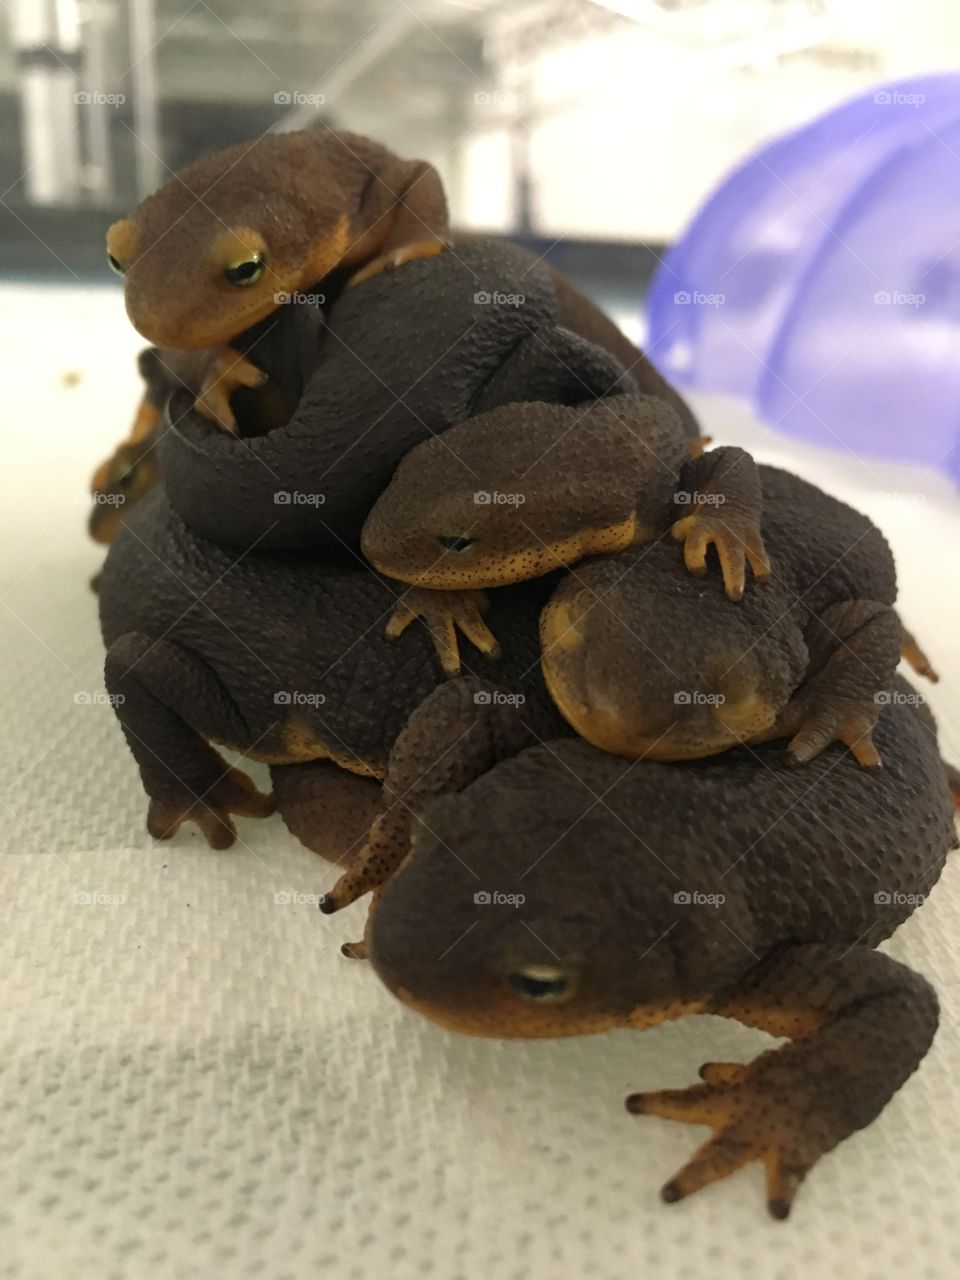 Pile of Newts